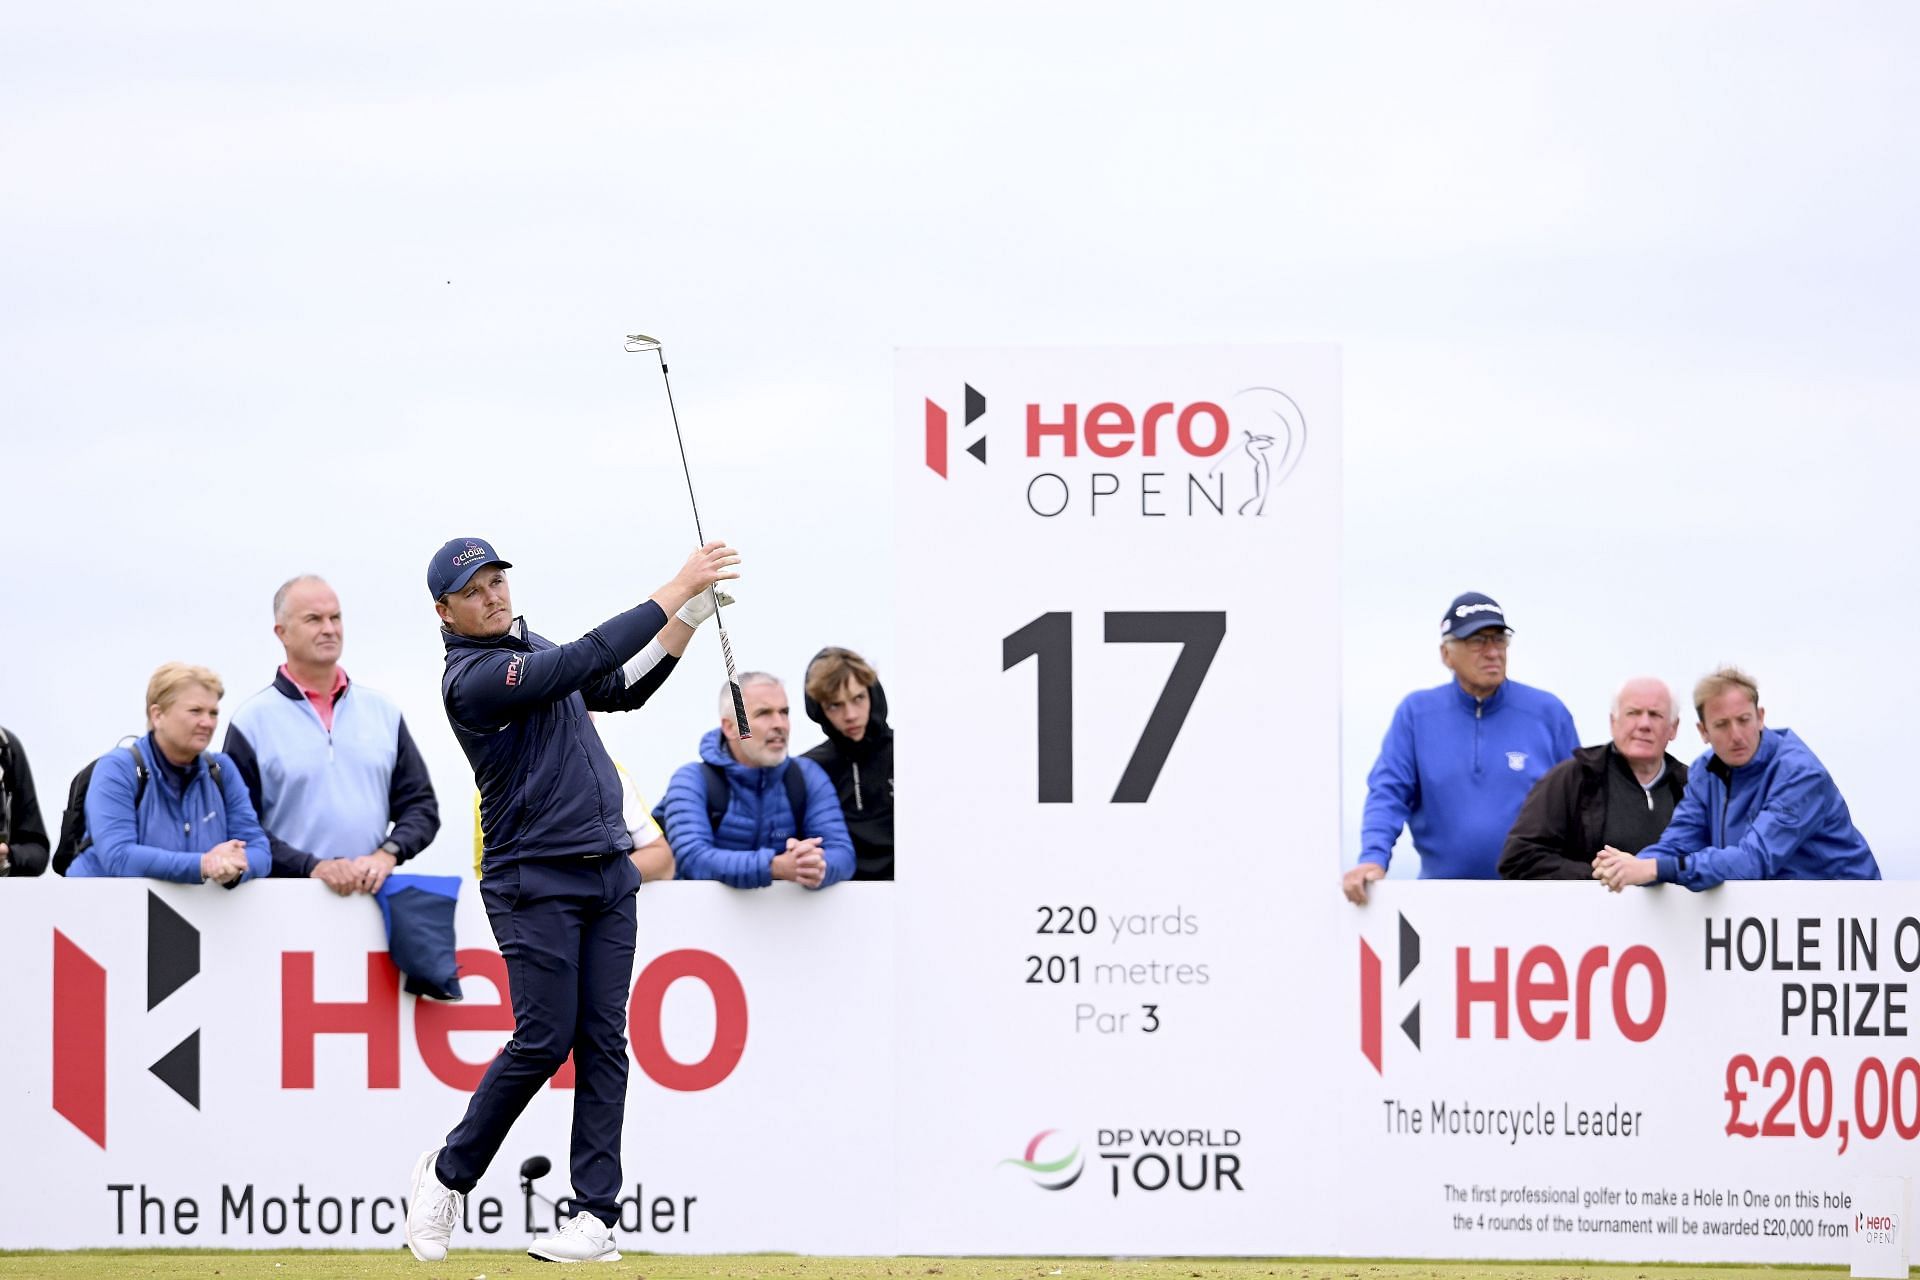 Eddie Pepperell at the Hero Open 2022 (Image via Getty)